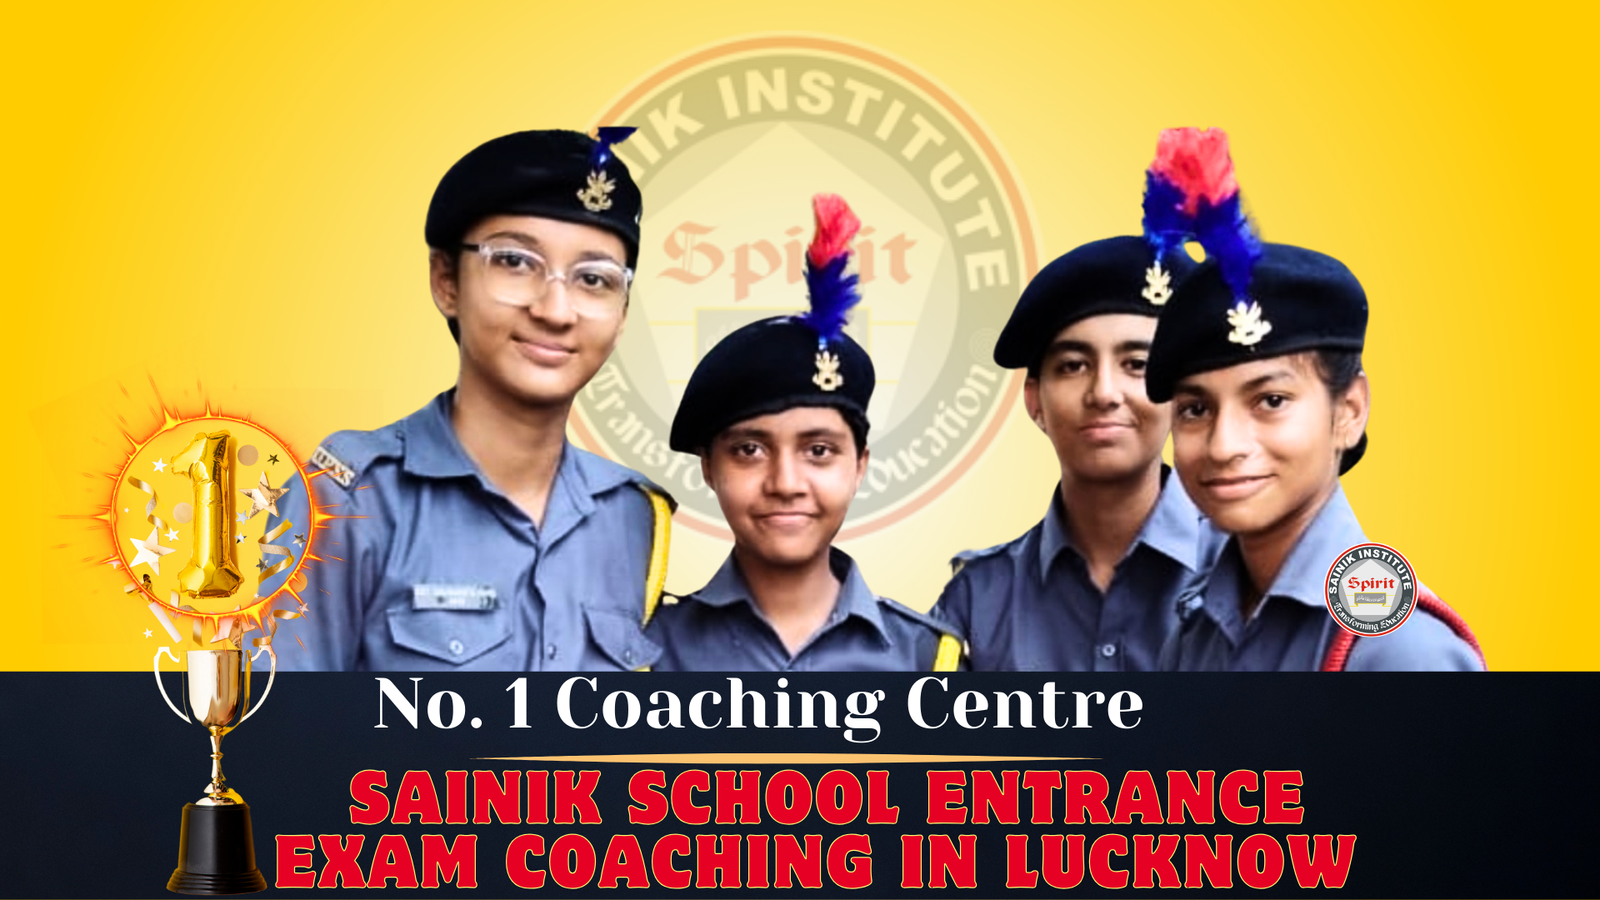 Sainik School entrance exam coaching  in Lucknow is a crucial step towards achieving success in the exam.